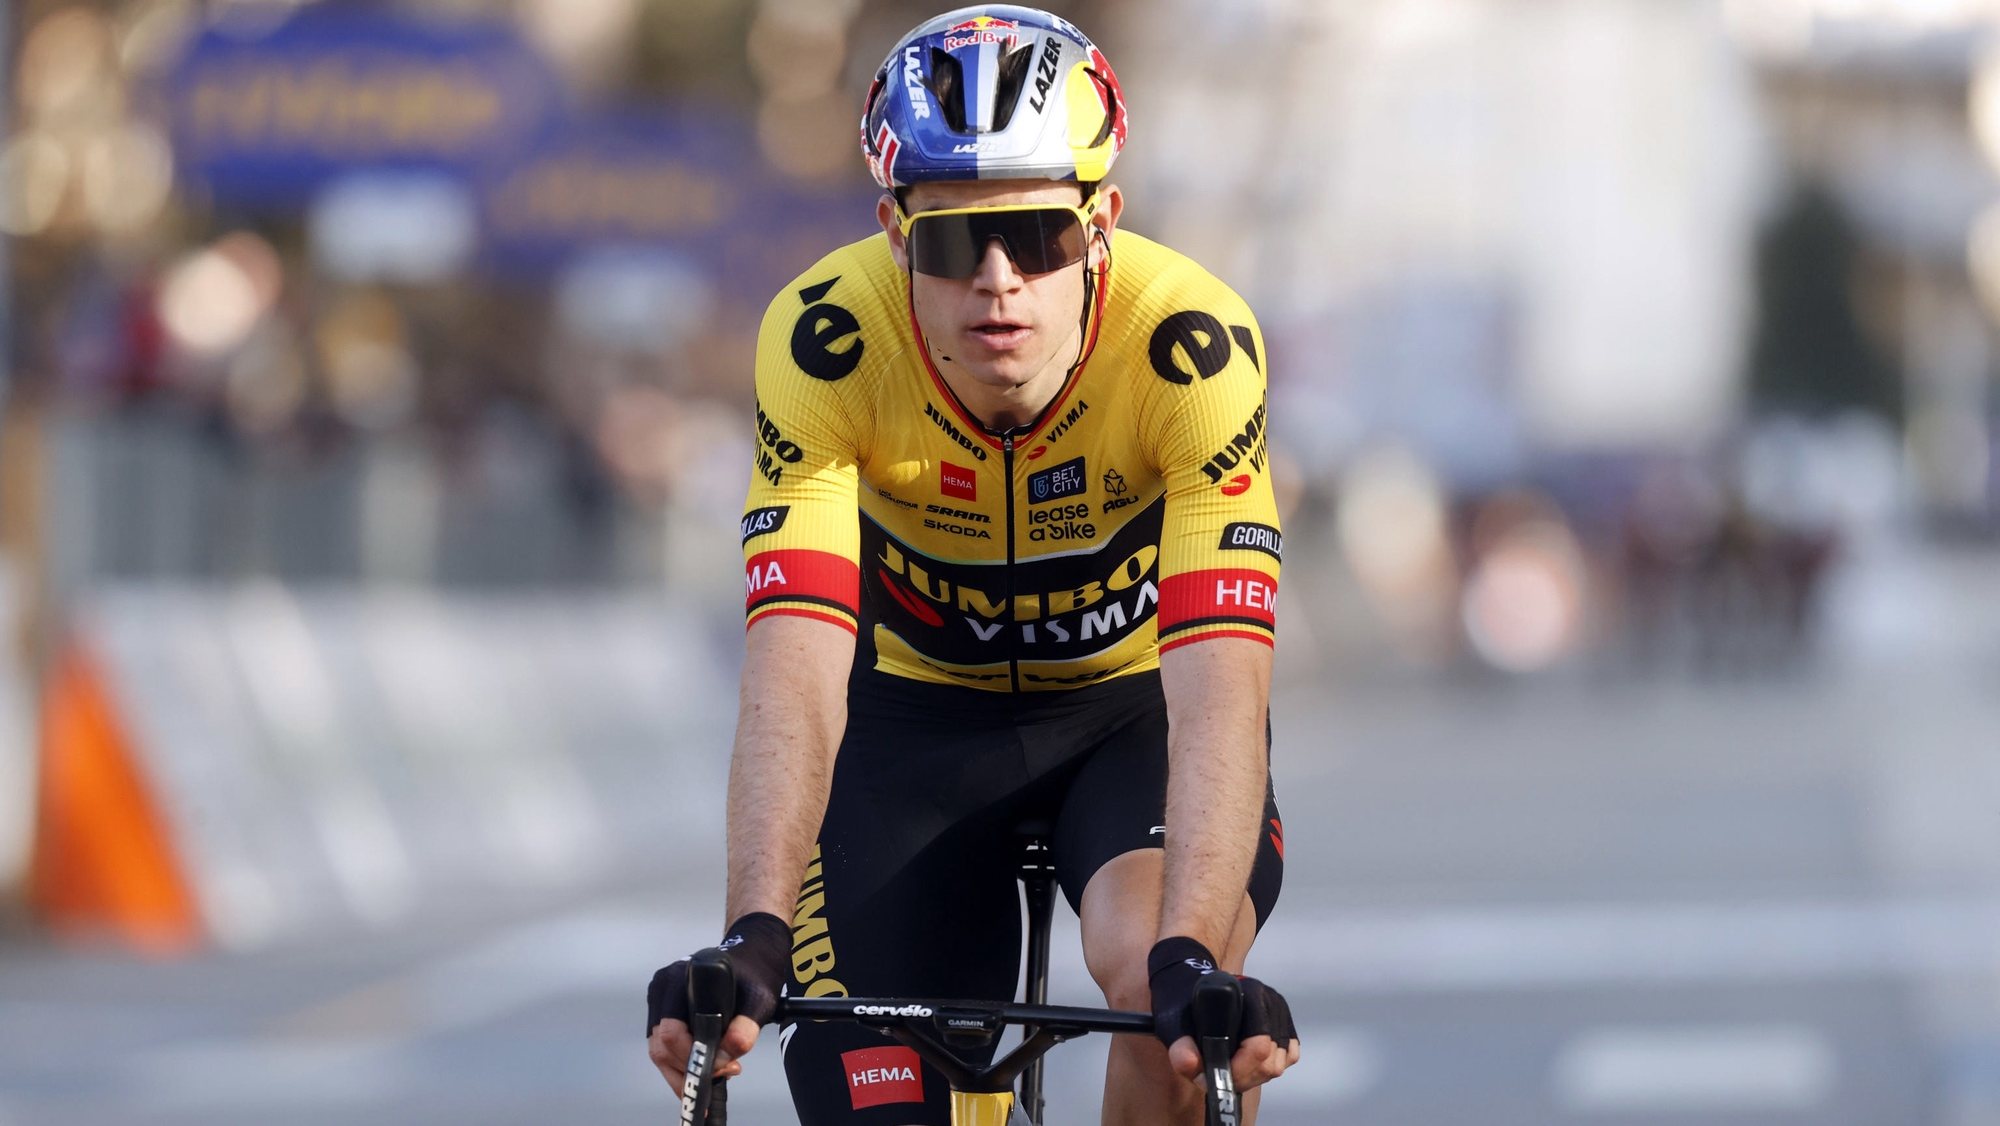 epa10507715 Wout Van Aert of the team Jumbo - Visma crosses the finish line after the second stage of the 58th Tirreno Adriatico cycling race, from Camaiore to Follonica, in Follonica, Italy, 07 March 2023.  EPA/ROBERTO BETTINI